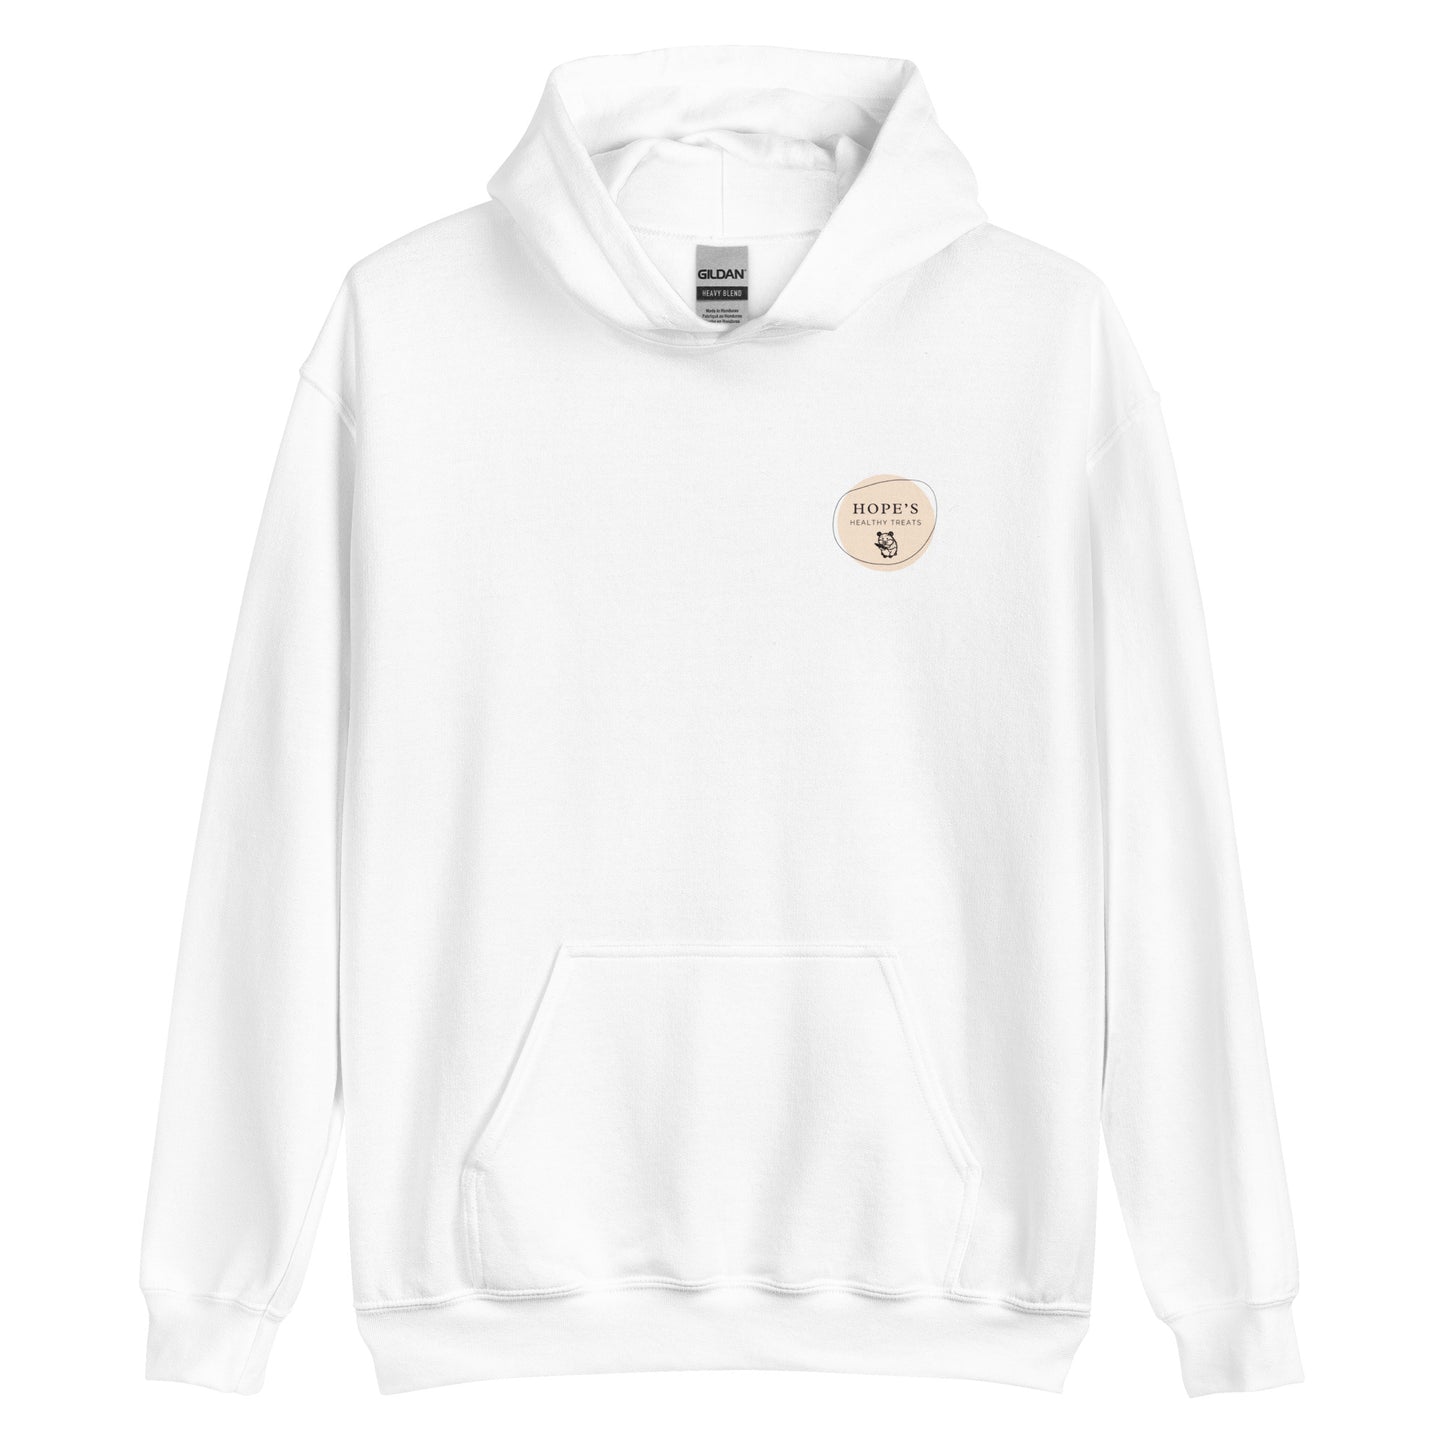 Promoting Proper Care White Hoodie